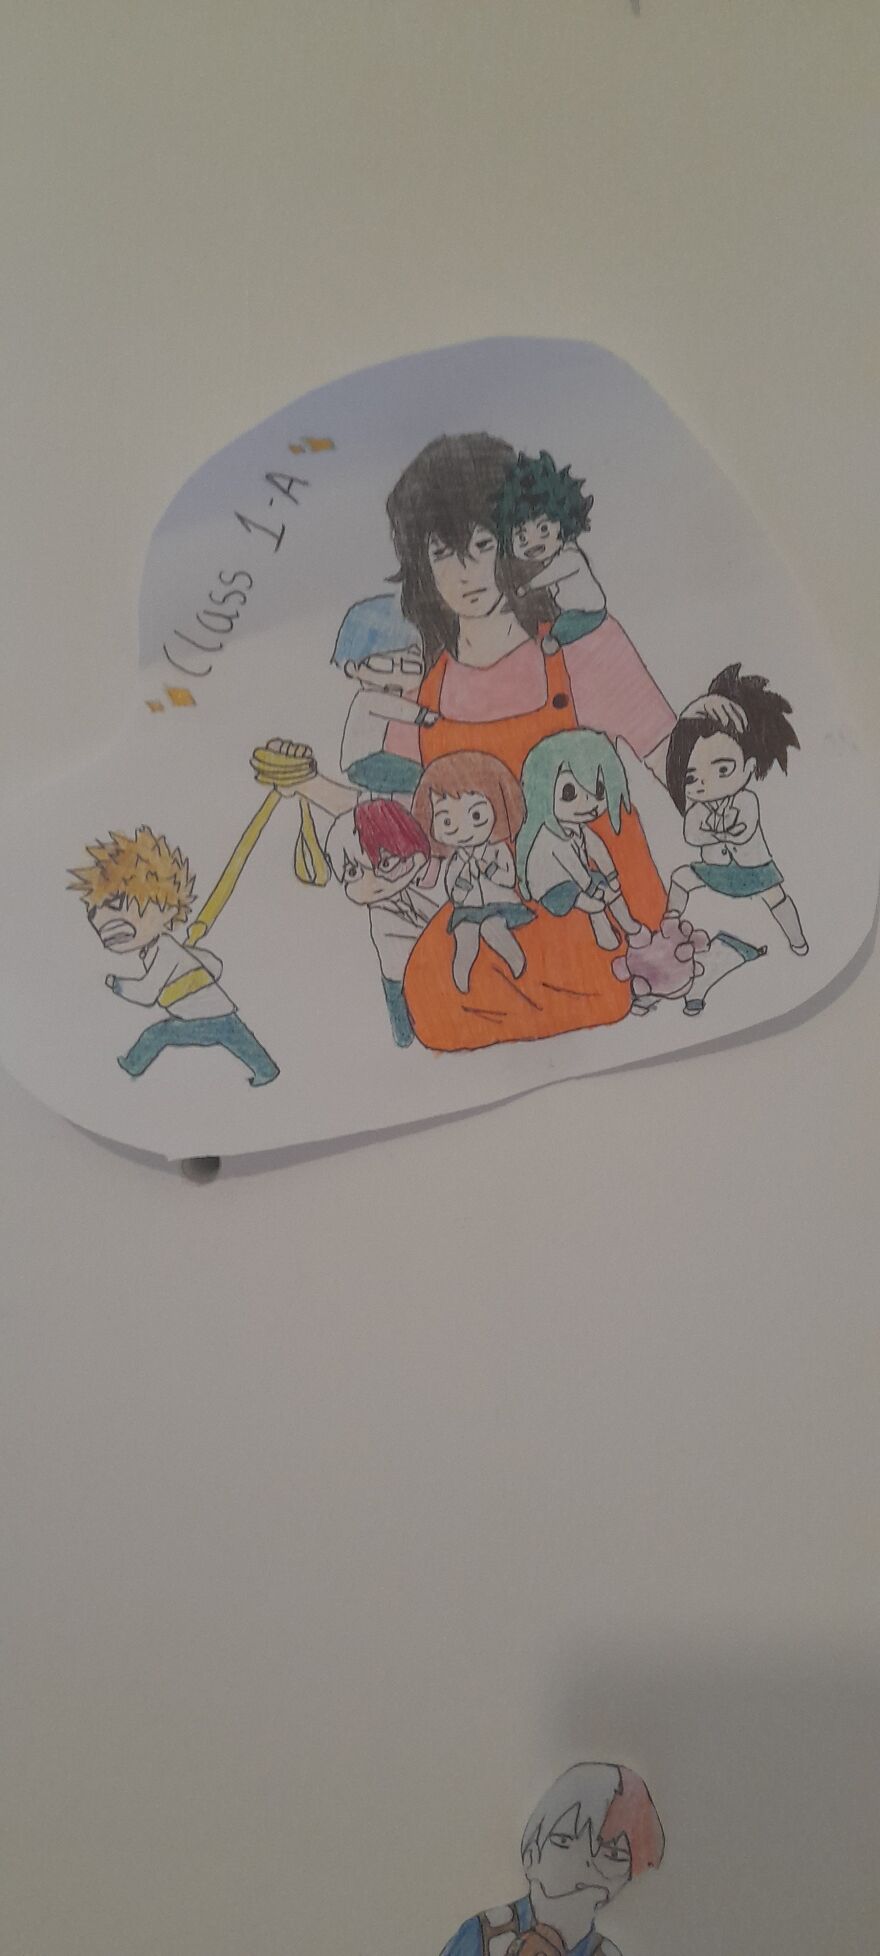 Just A Couple Of Drawings I've Made From Animes I've Watched.